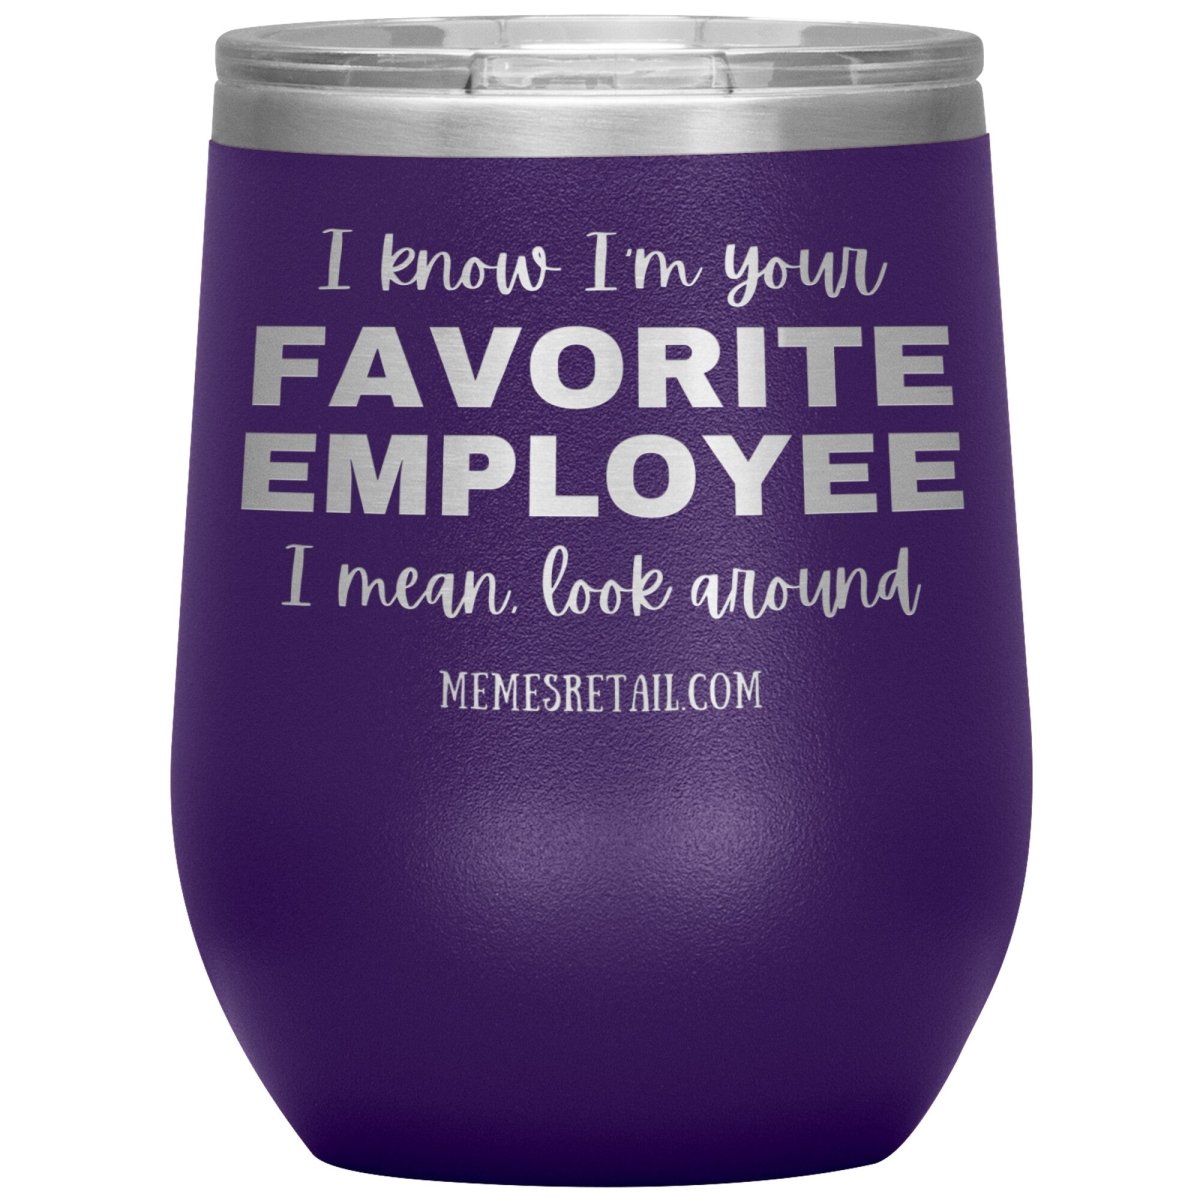 I know I’m your favorite employee, I mean look around, 12oz Wine Insulated Tumbler / Purple - MemesRetail.com